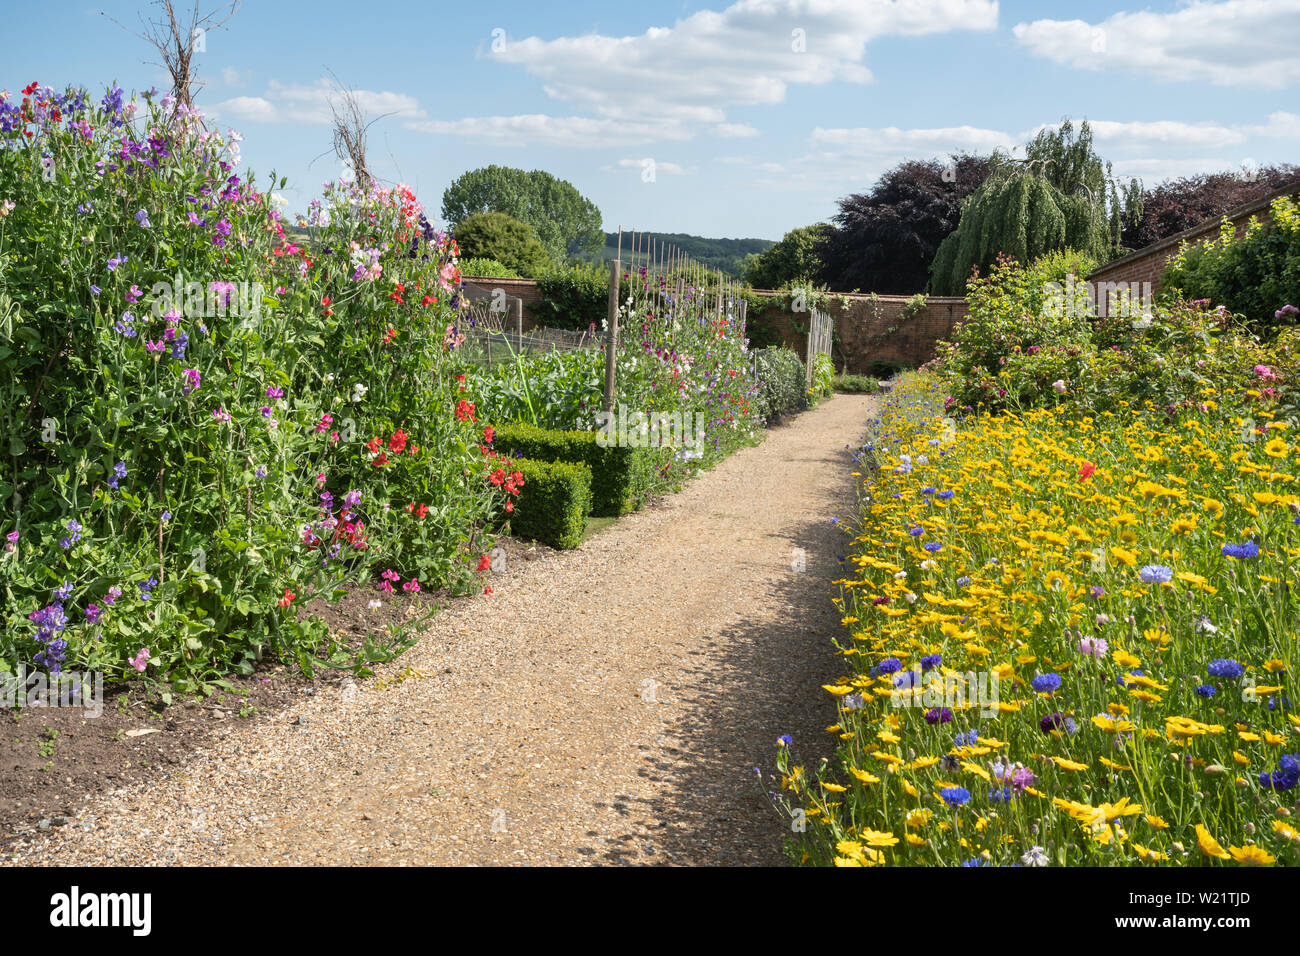 The walled kitchen gardens at Titsey Place country estate in Surrey, UK, on a sunny summer day Stock Photo